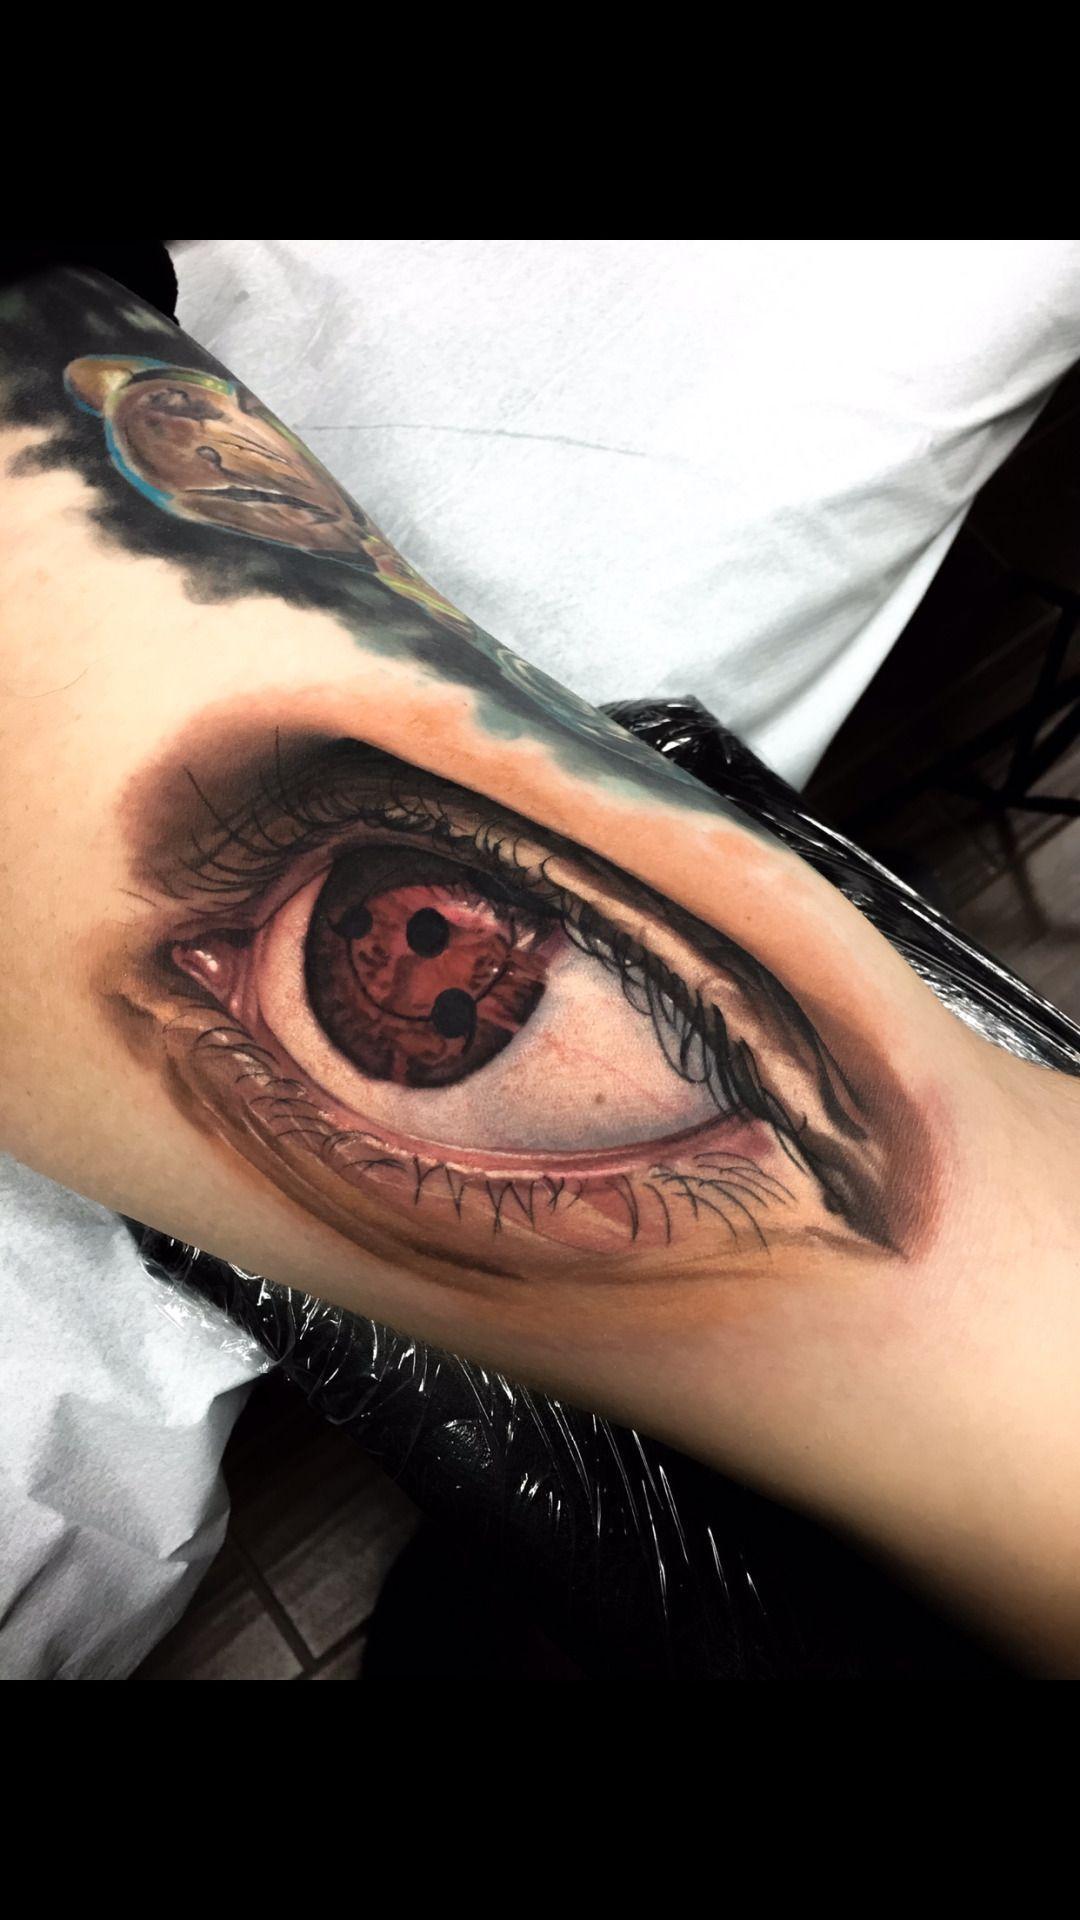 Sharingan done on me by Jake Ross, who tattoos out of Stay True